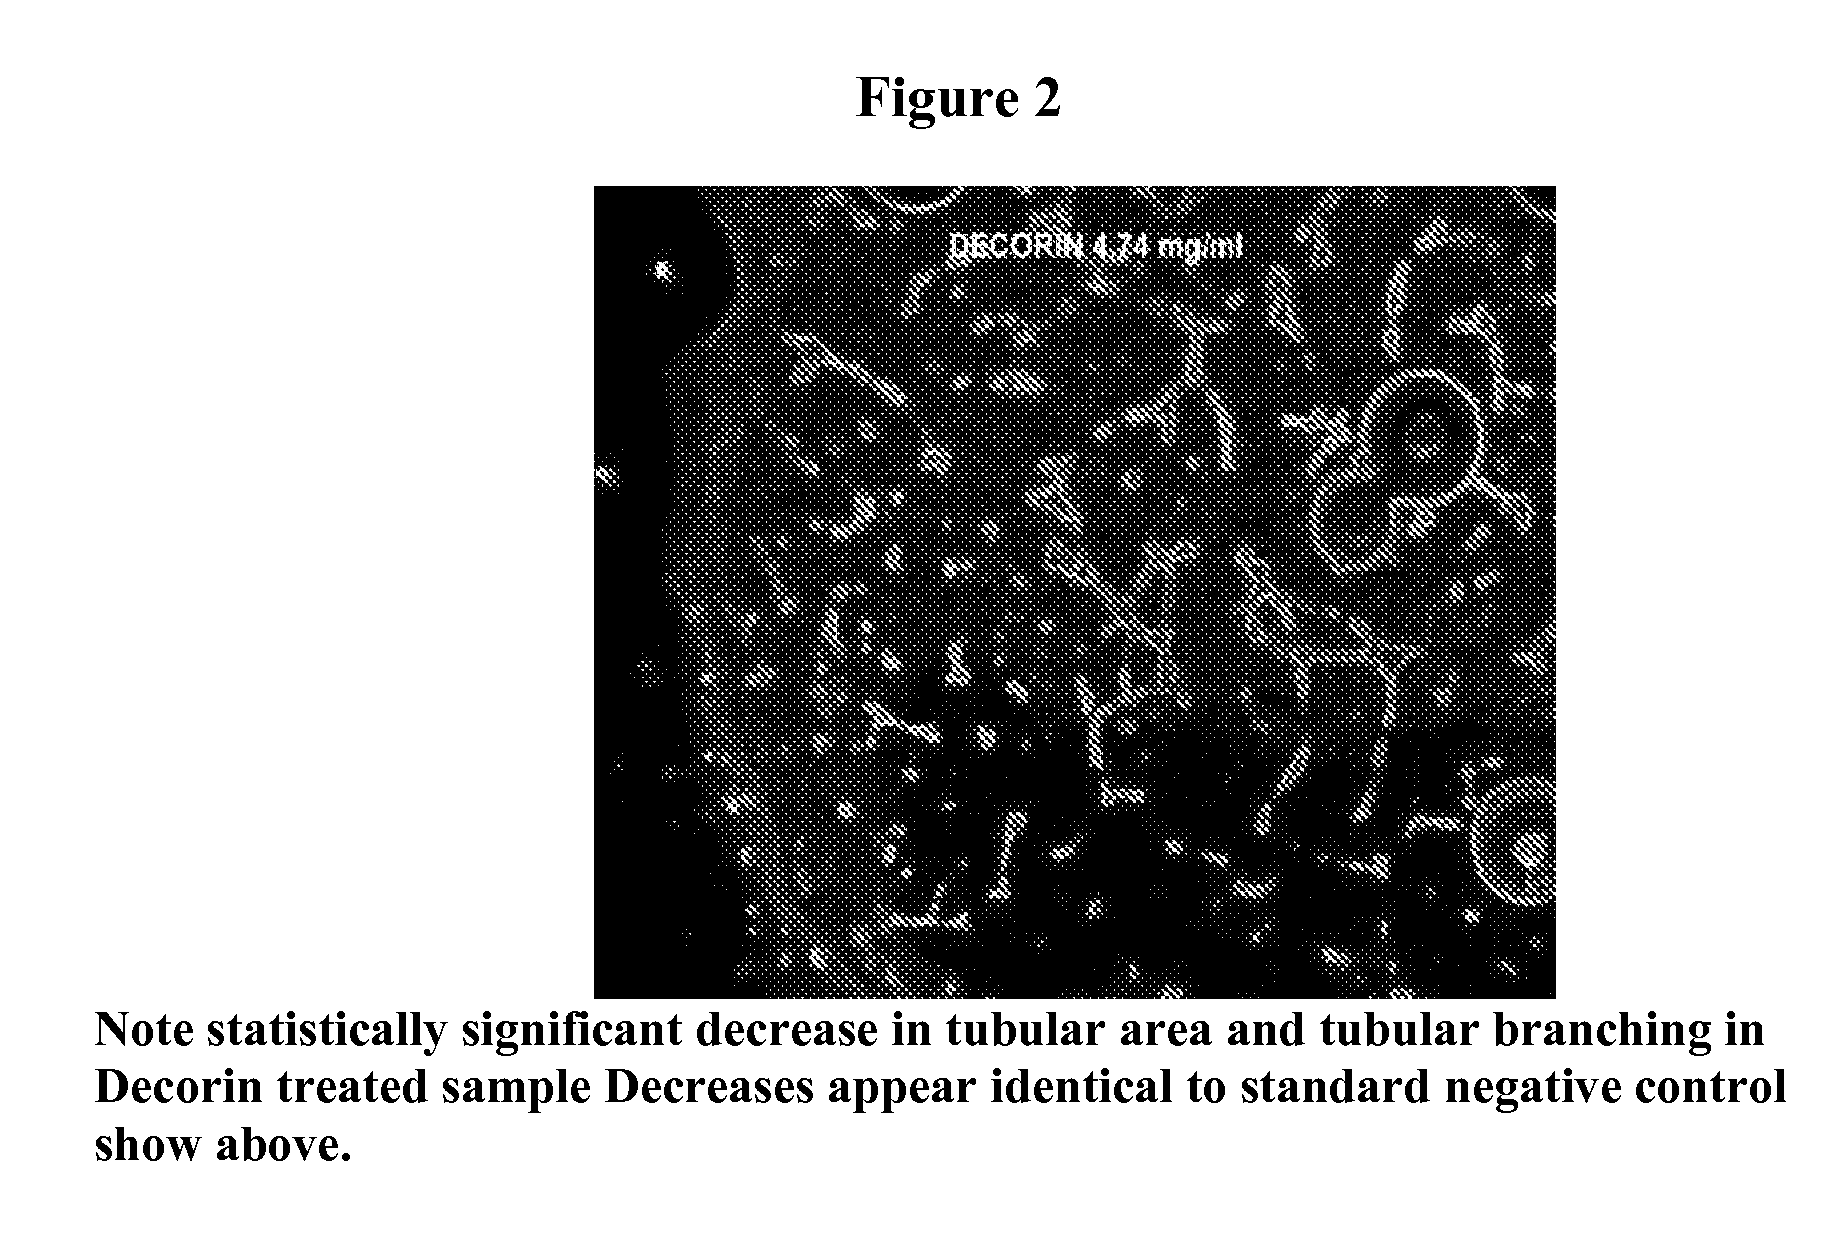 Composition and methods for the prevention and treatment of macular degeneration, diabetic retinopathy, and diabetic macular edema